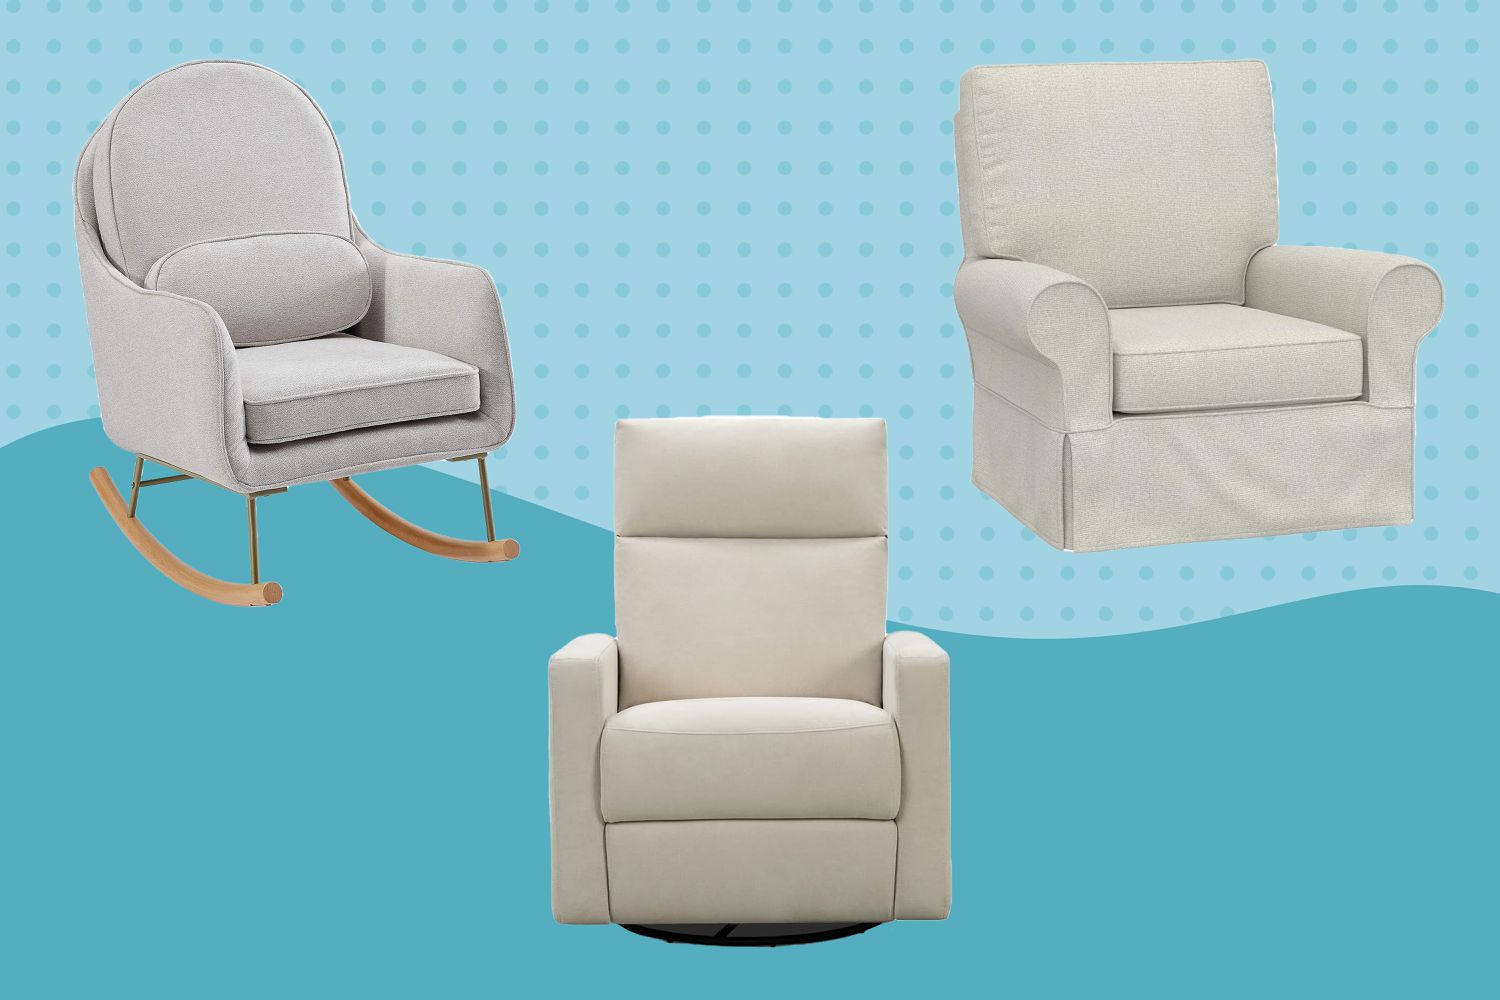 Choosing the Best Glider Recliner for Your Baby’s Room插图4